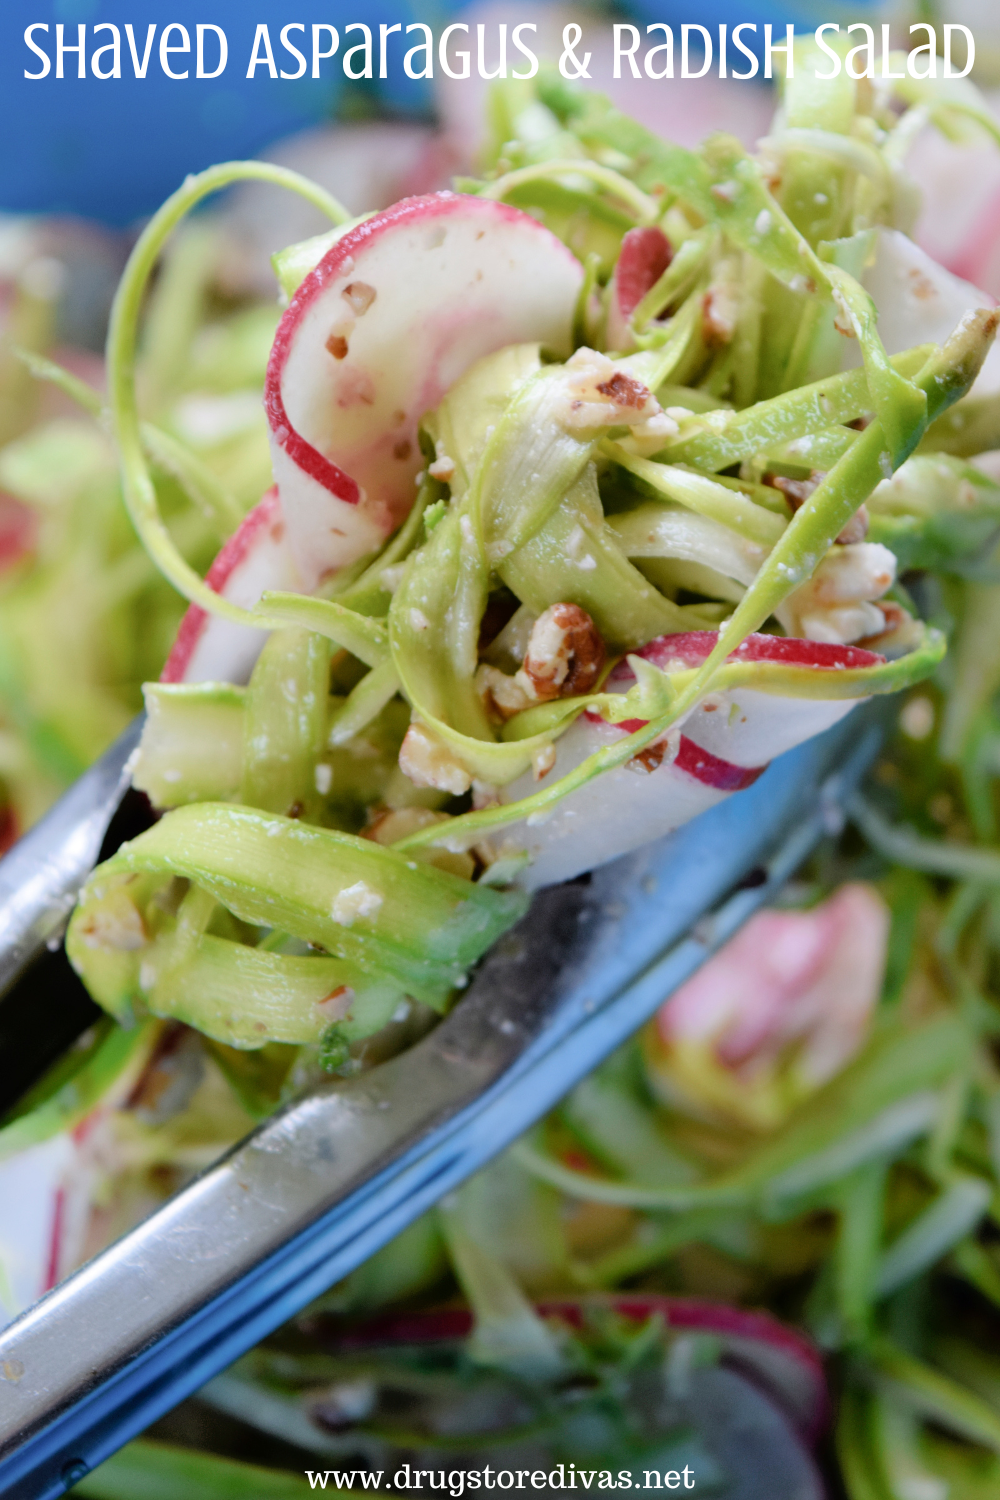 Thin slices of asparagus and radish being held up by tongs with the words 